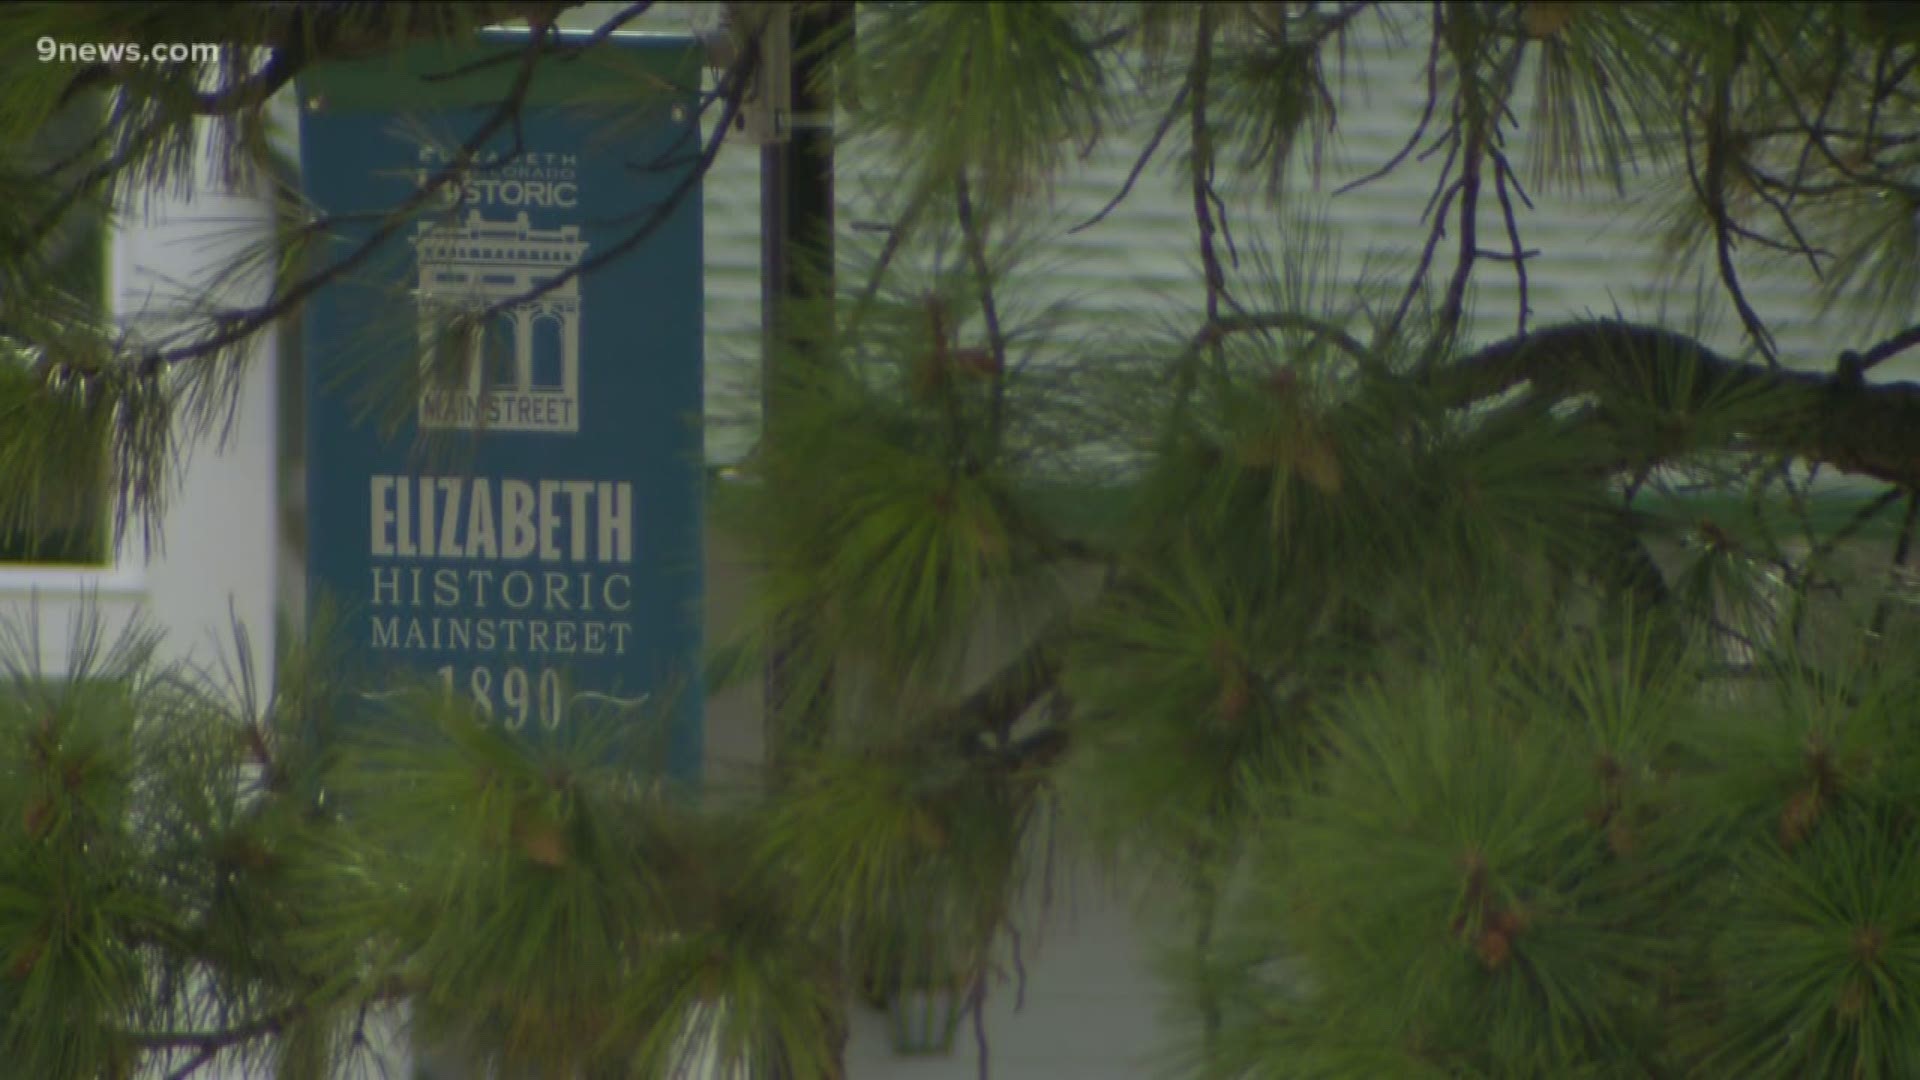 A demographer discusses the forecasted growth for the town of Elizabeth and why so much growth is expected in the coming years.